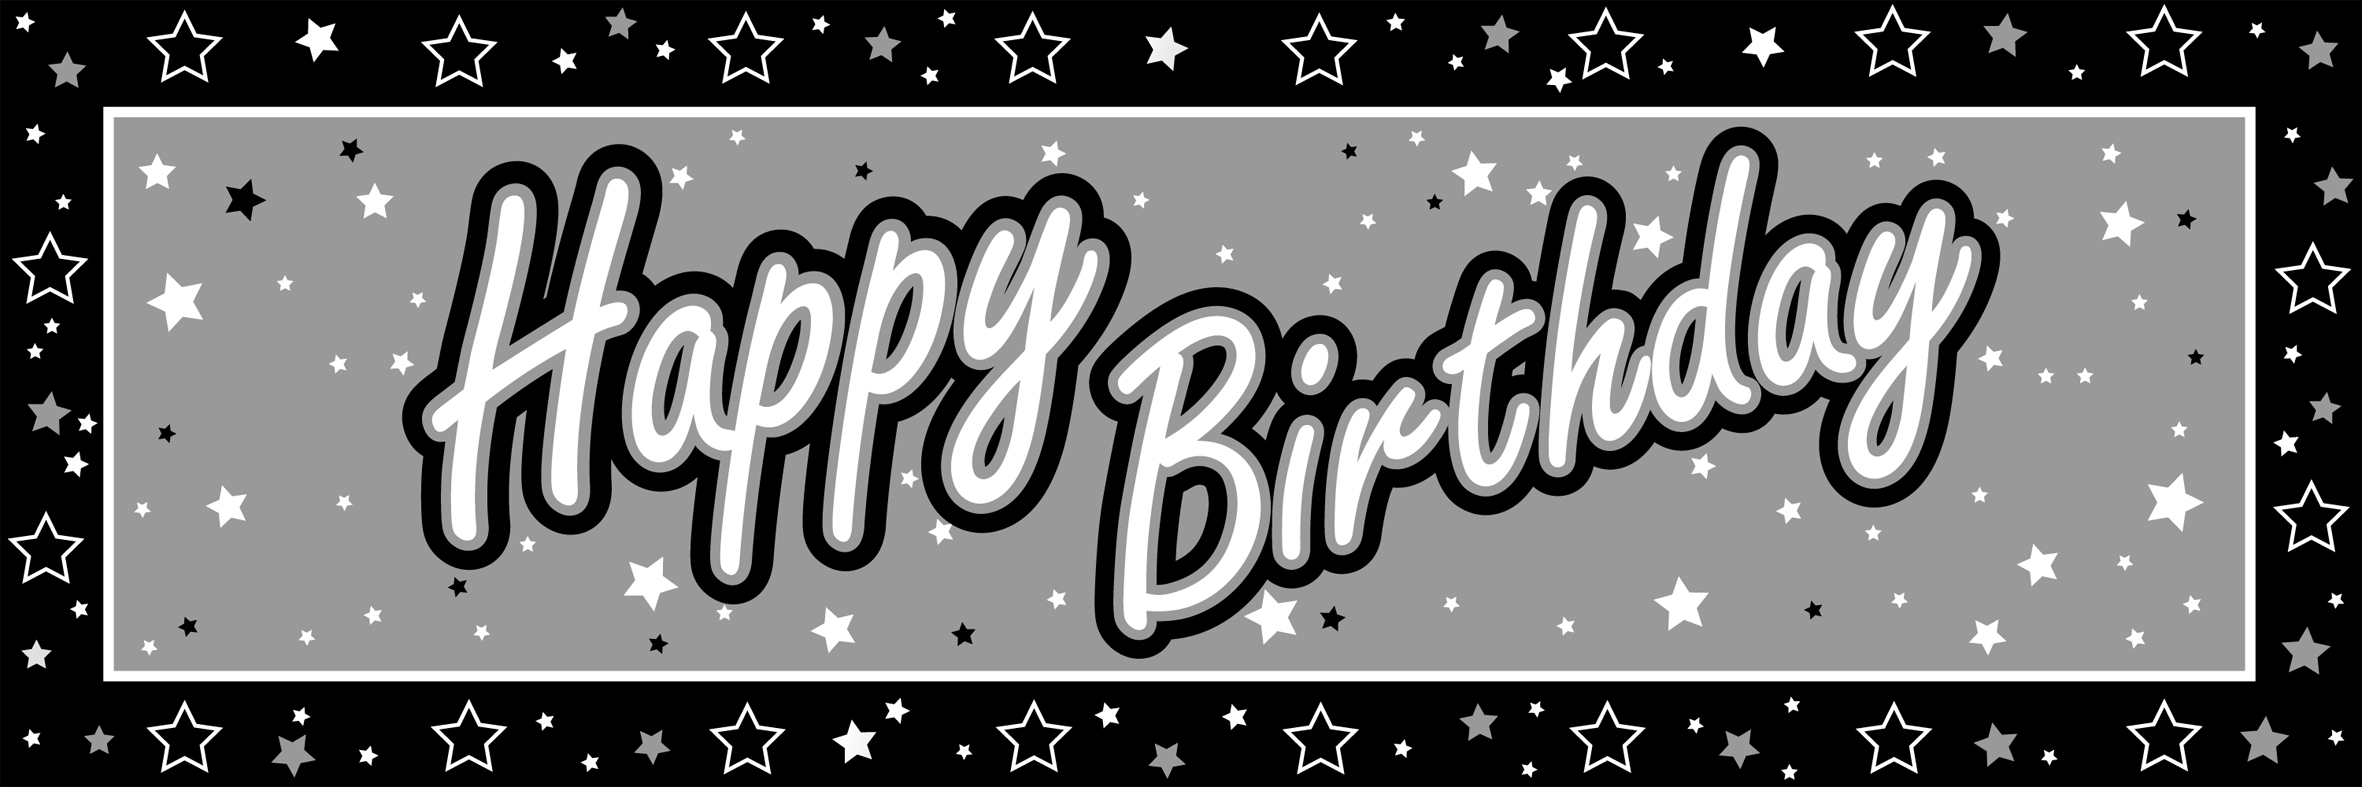 Black And White Happy Th Birthday Clip Art Free Birthday Banners